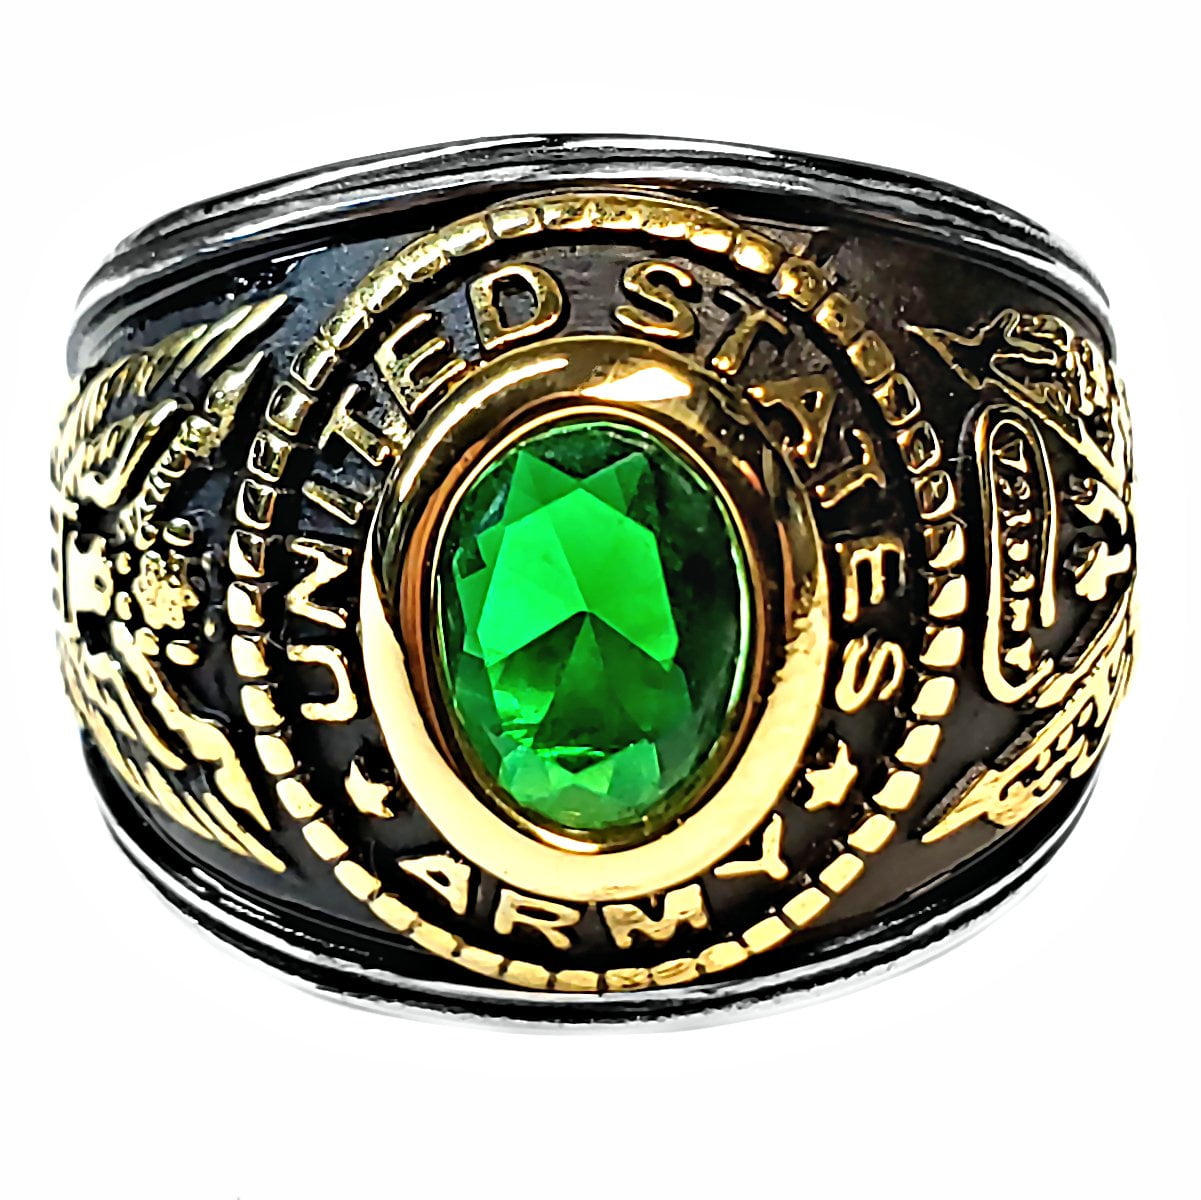 United States Army Military Stainless Steel Unisex Green Emerald Ring Size 13 